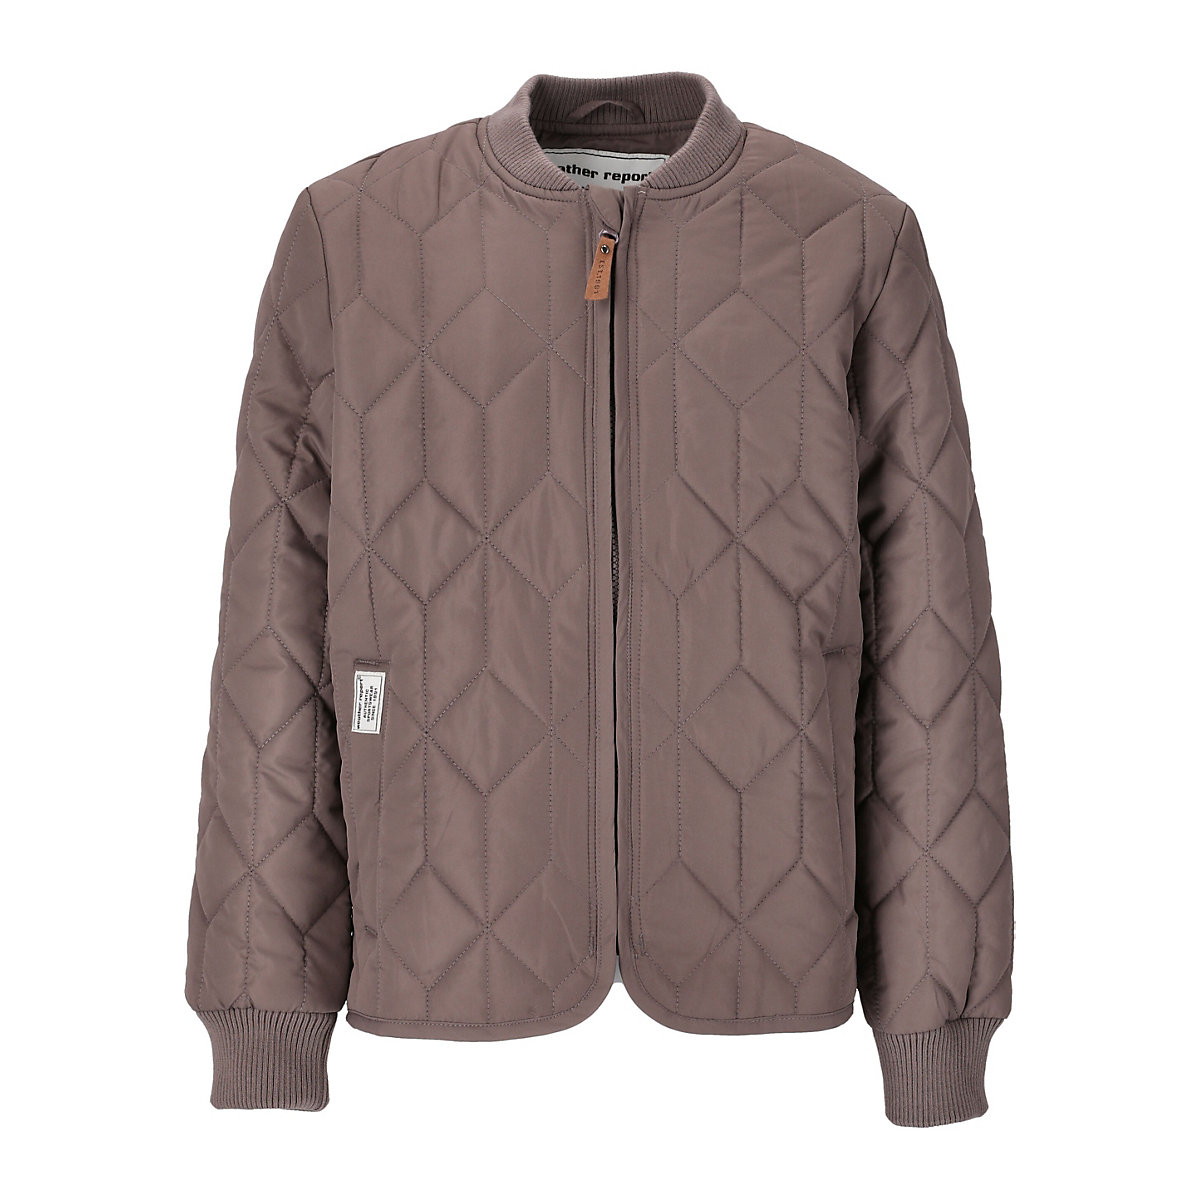 weather report® WEATHER REPORT Steppjacke taupe